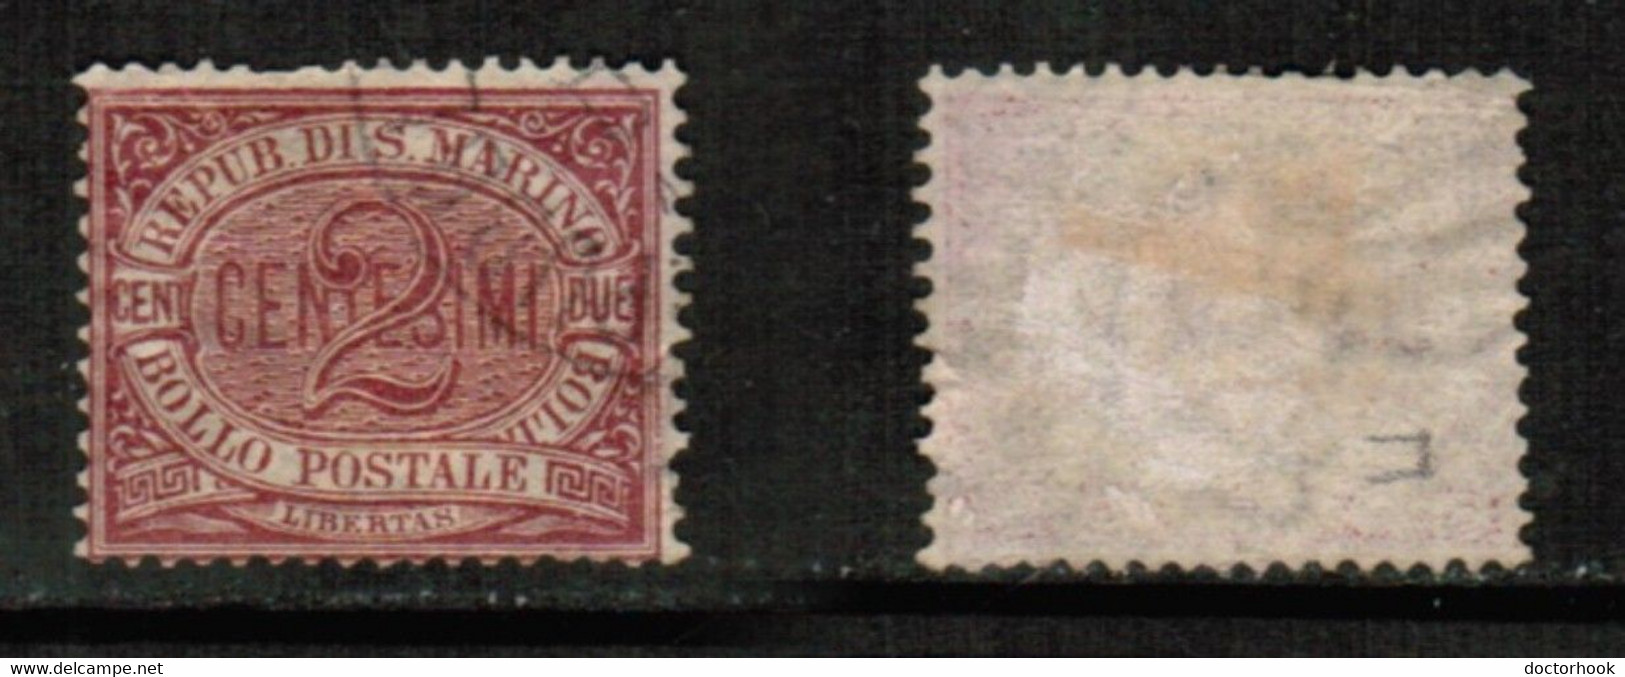 SAN MARINO   Scott # 3 USED (CONDITION AS PER SCAN) (Stamp Scan # 858-8) - Used Stamps